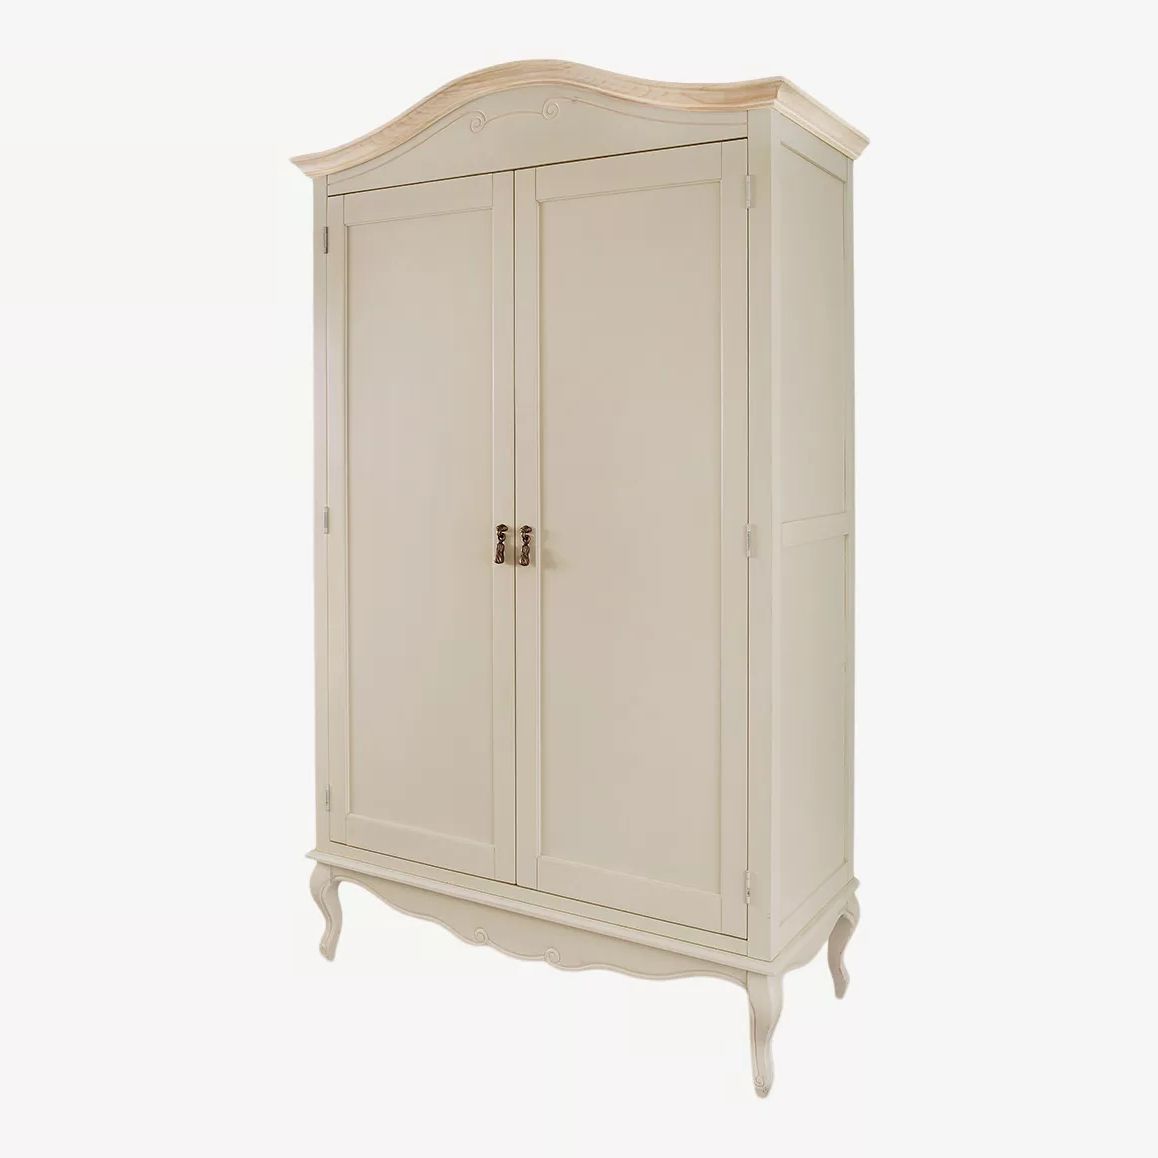 Shabby Chic Wardrobes – Furniture.co.uk For Shabby Chic Wardrobes For Sale (Gallery 5 of 20)